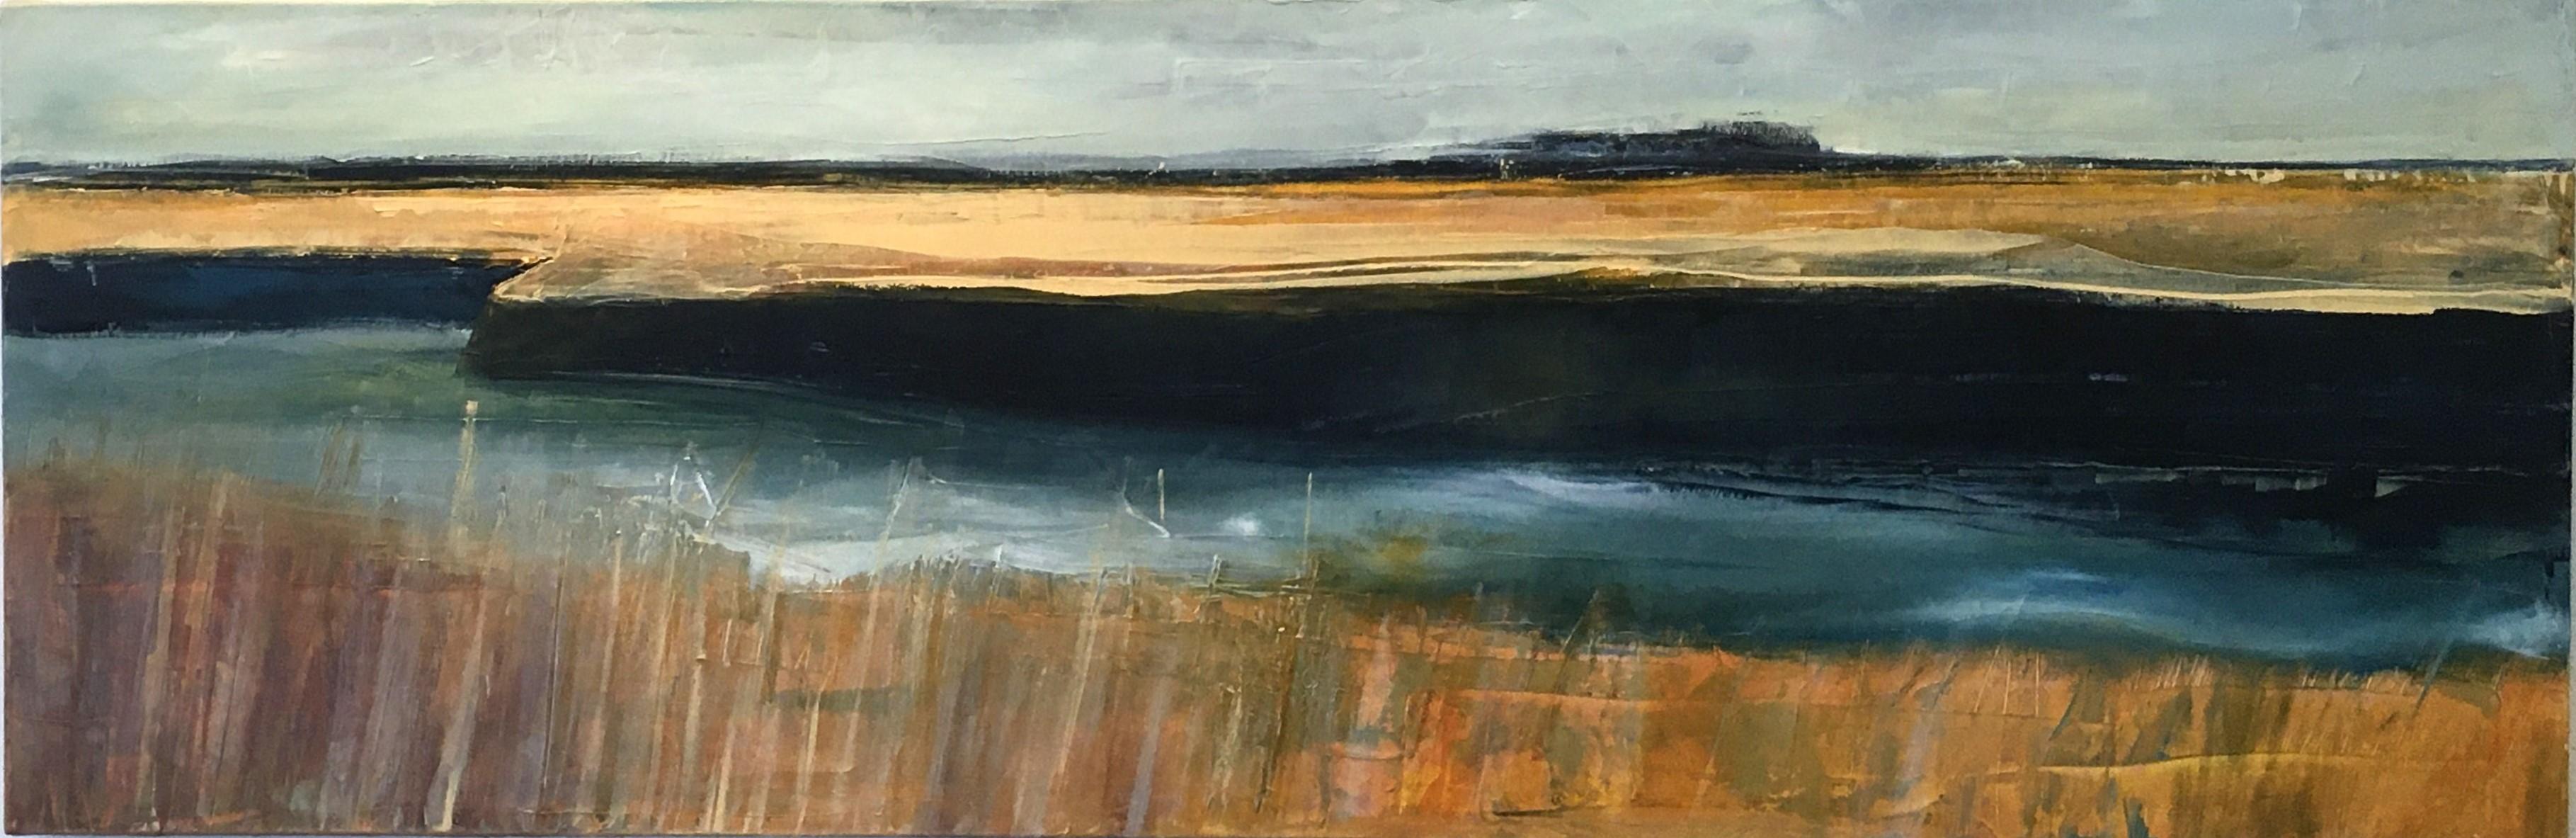 Dale Najarian Abstract Painting - Fall Grass,  Landscape, Oil on Canvas, Textured, Water, Waterscape, By the Water